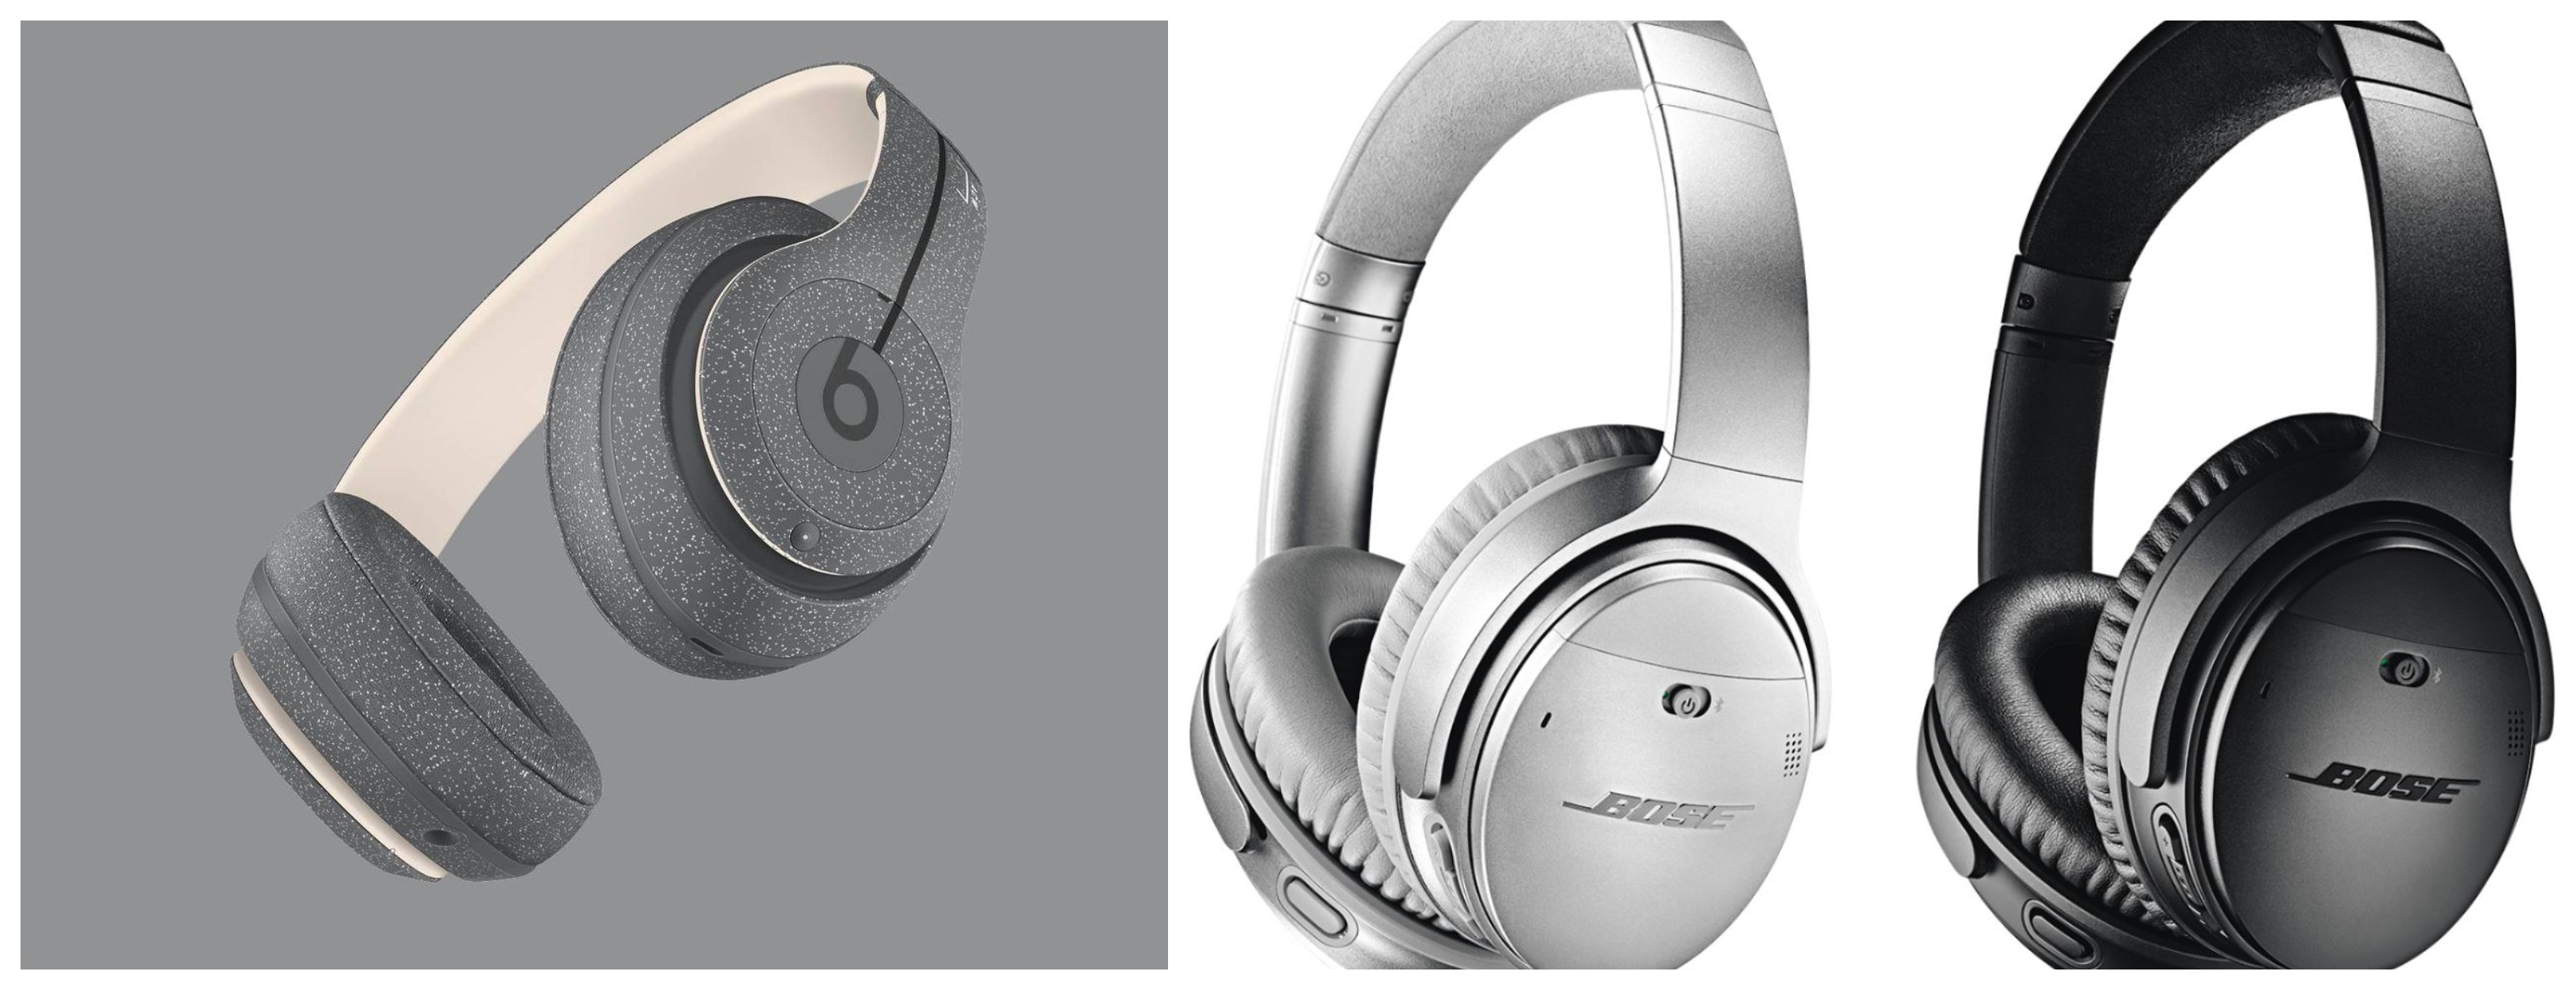 Beats Studio 3 and Bose QC35 collage